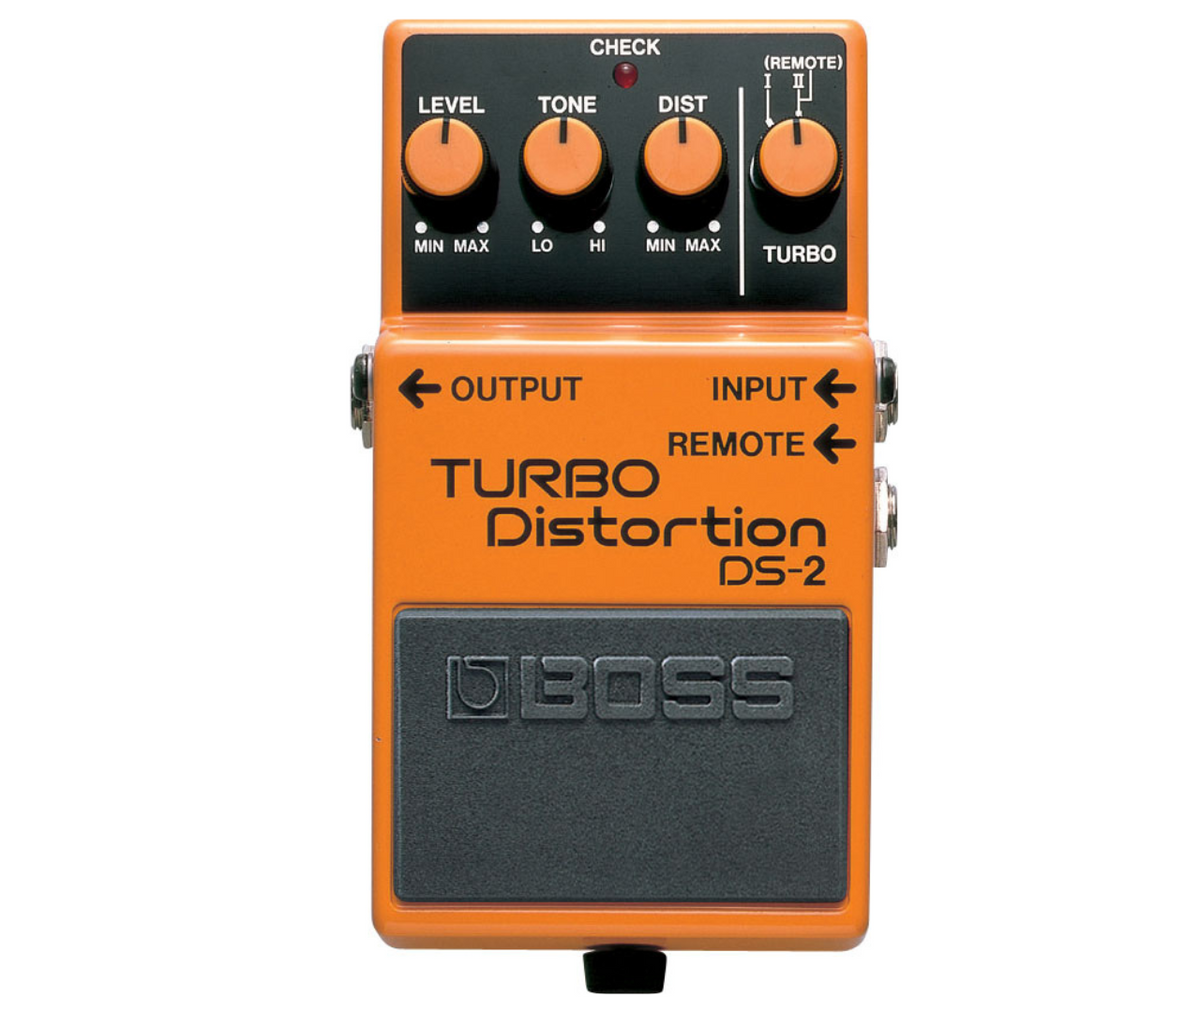 BOSS DS-2 Turbo Distortion Best Guitar Effects Pedal Warm and Mellow Distortion Blues-Rock Rhythms Distortion and Mid-range Boost for Leads